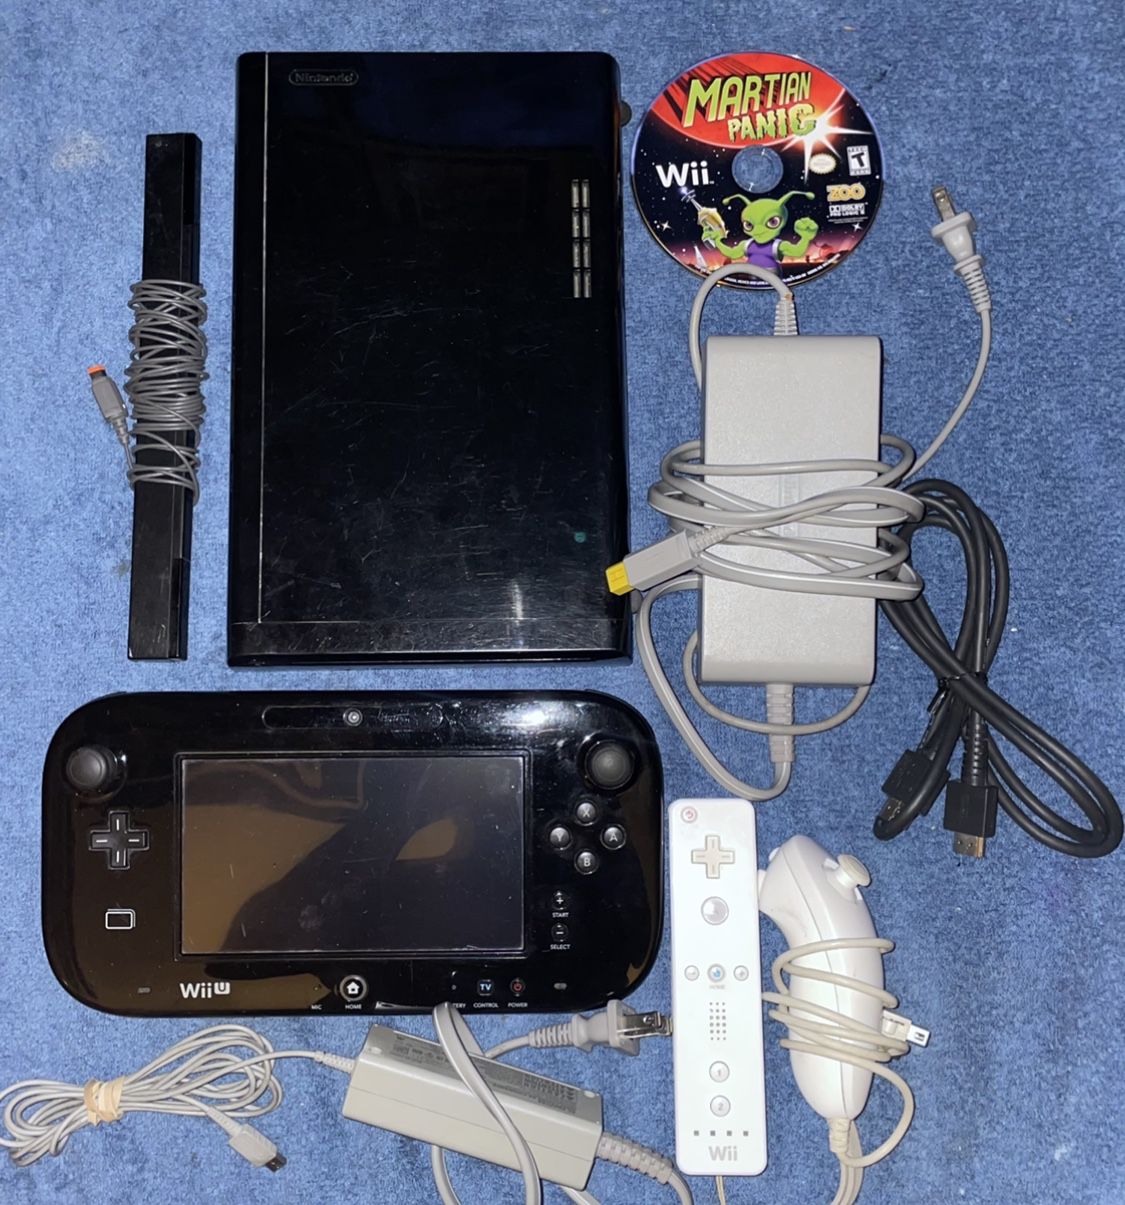 NINTENDO WII U CONSOLE SYSTEM WITH ALL CORDS, REMOTE CONTROLLER, GAMEPAD & VIDEO GAME